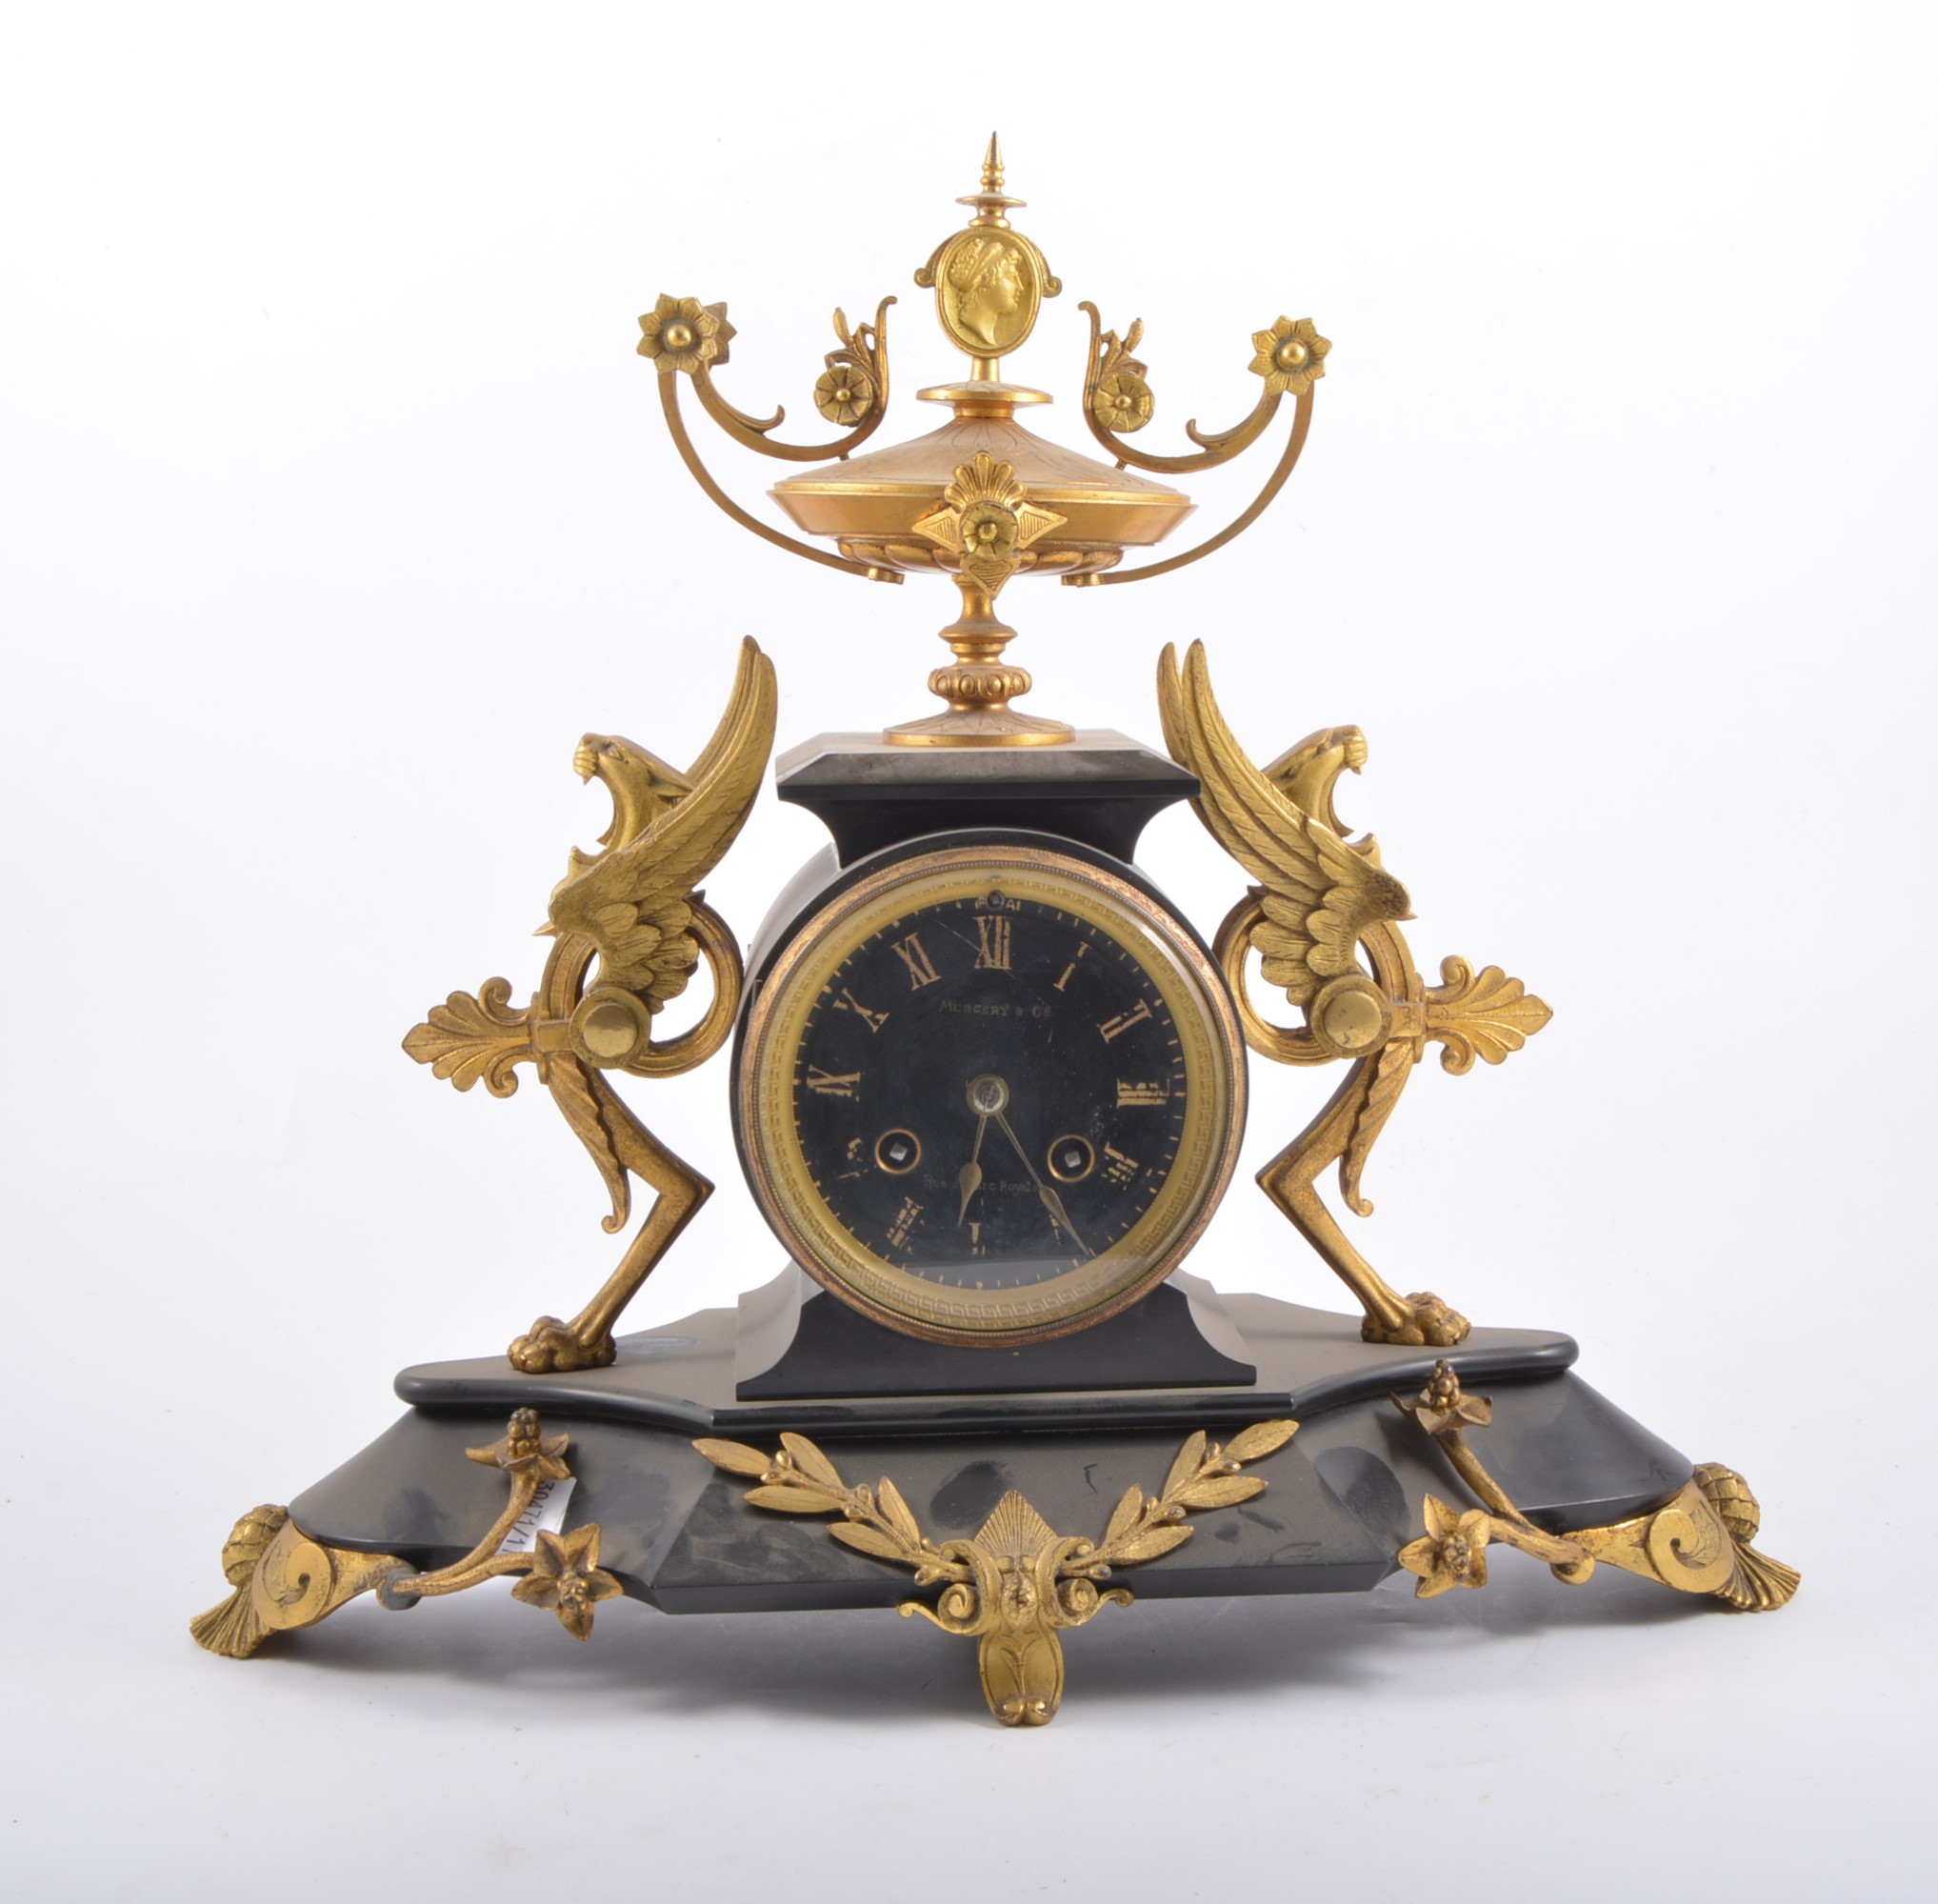 A French Empire style marble and ormulu mantel clock, late 19th century, signed Mercery & Co,